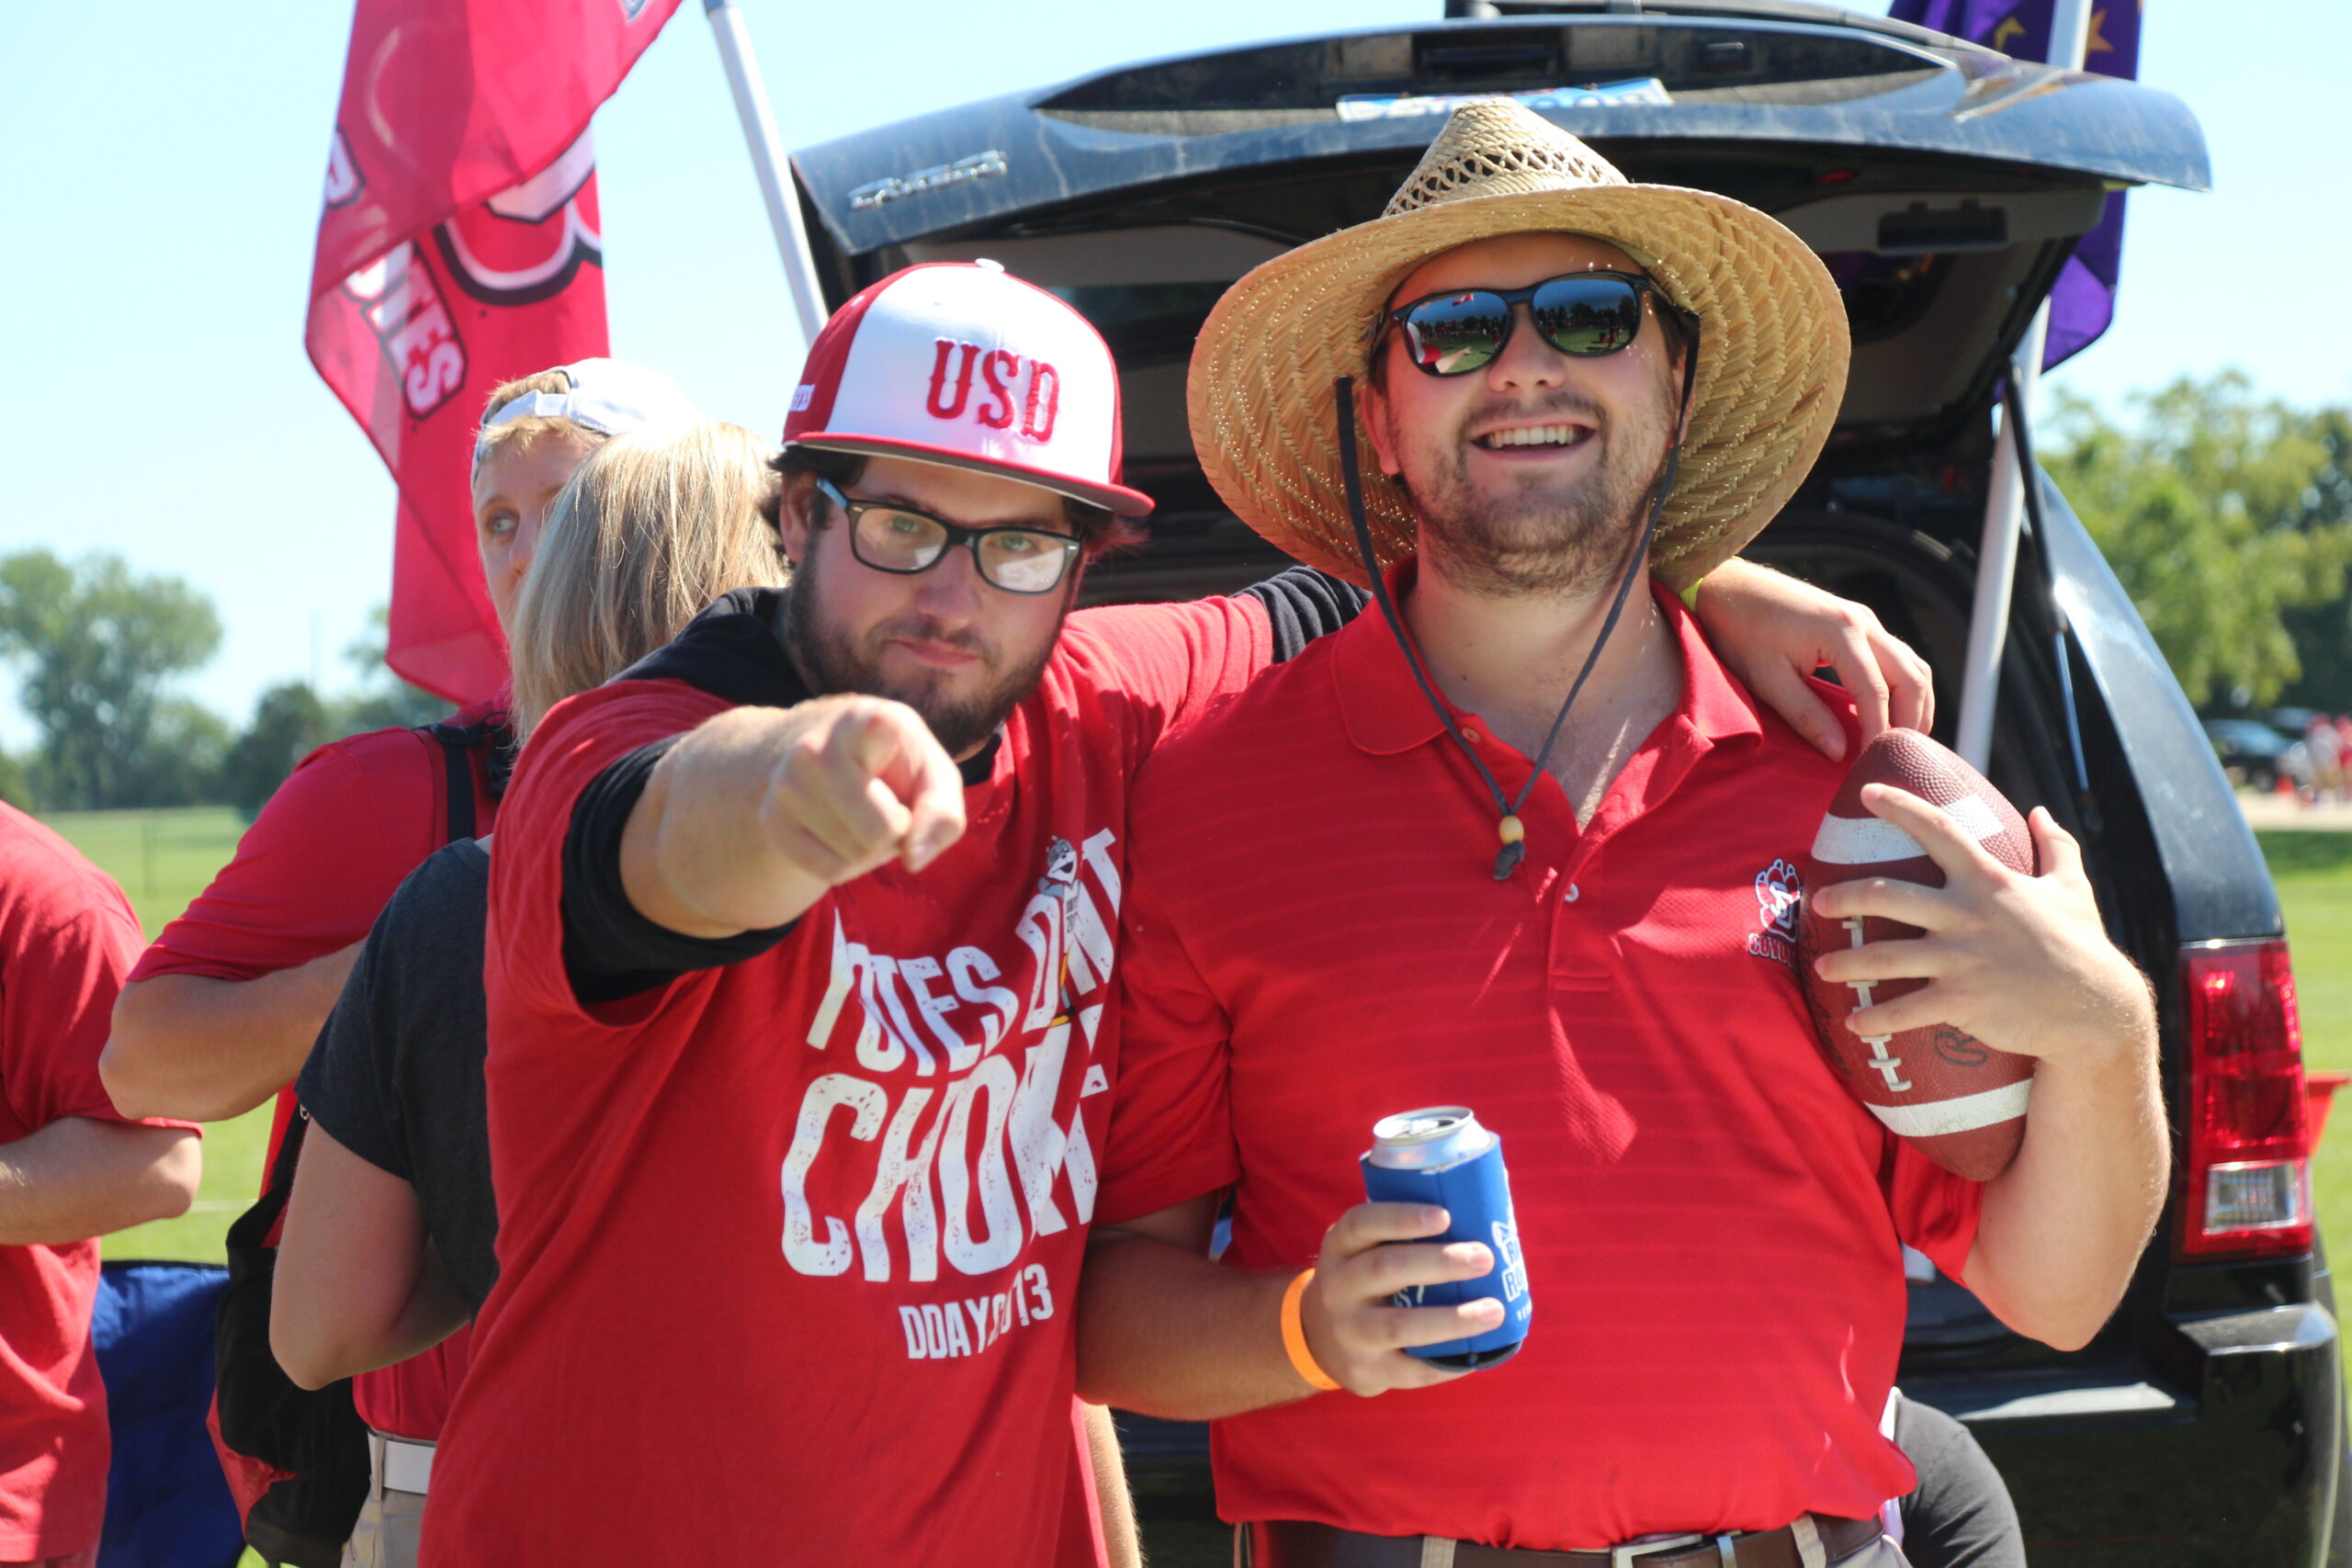 Dakota Days Tailgate to Bring in Biggest Crowd of the Year